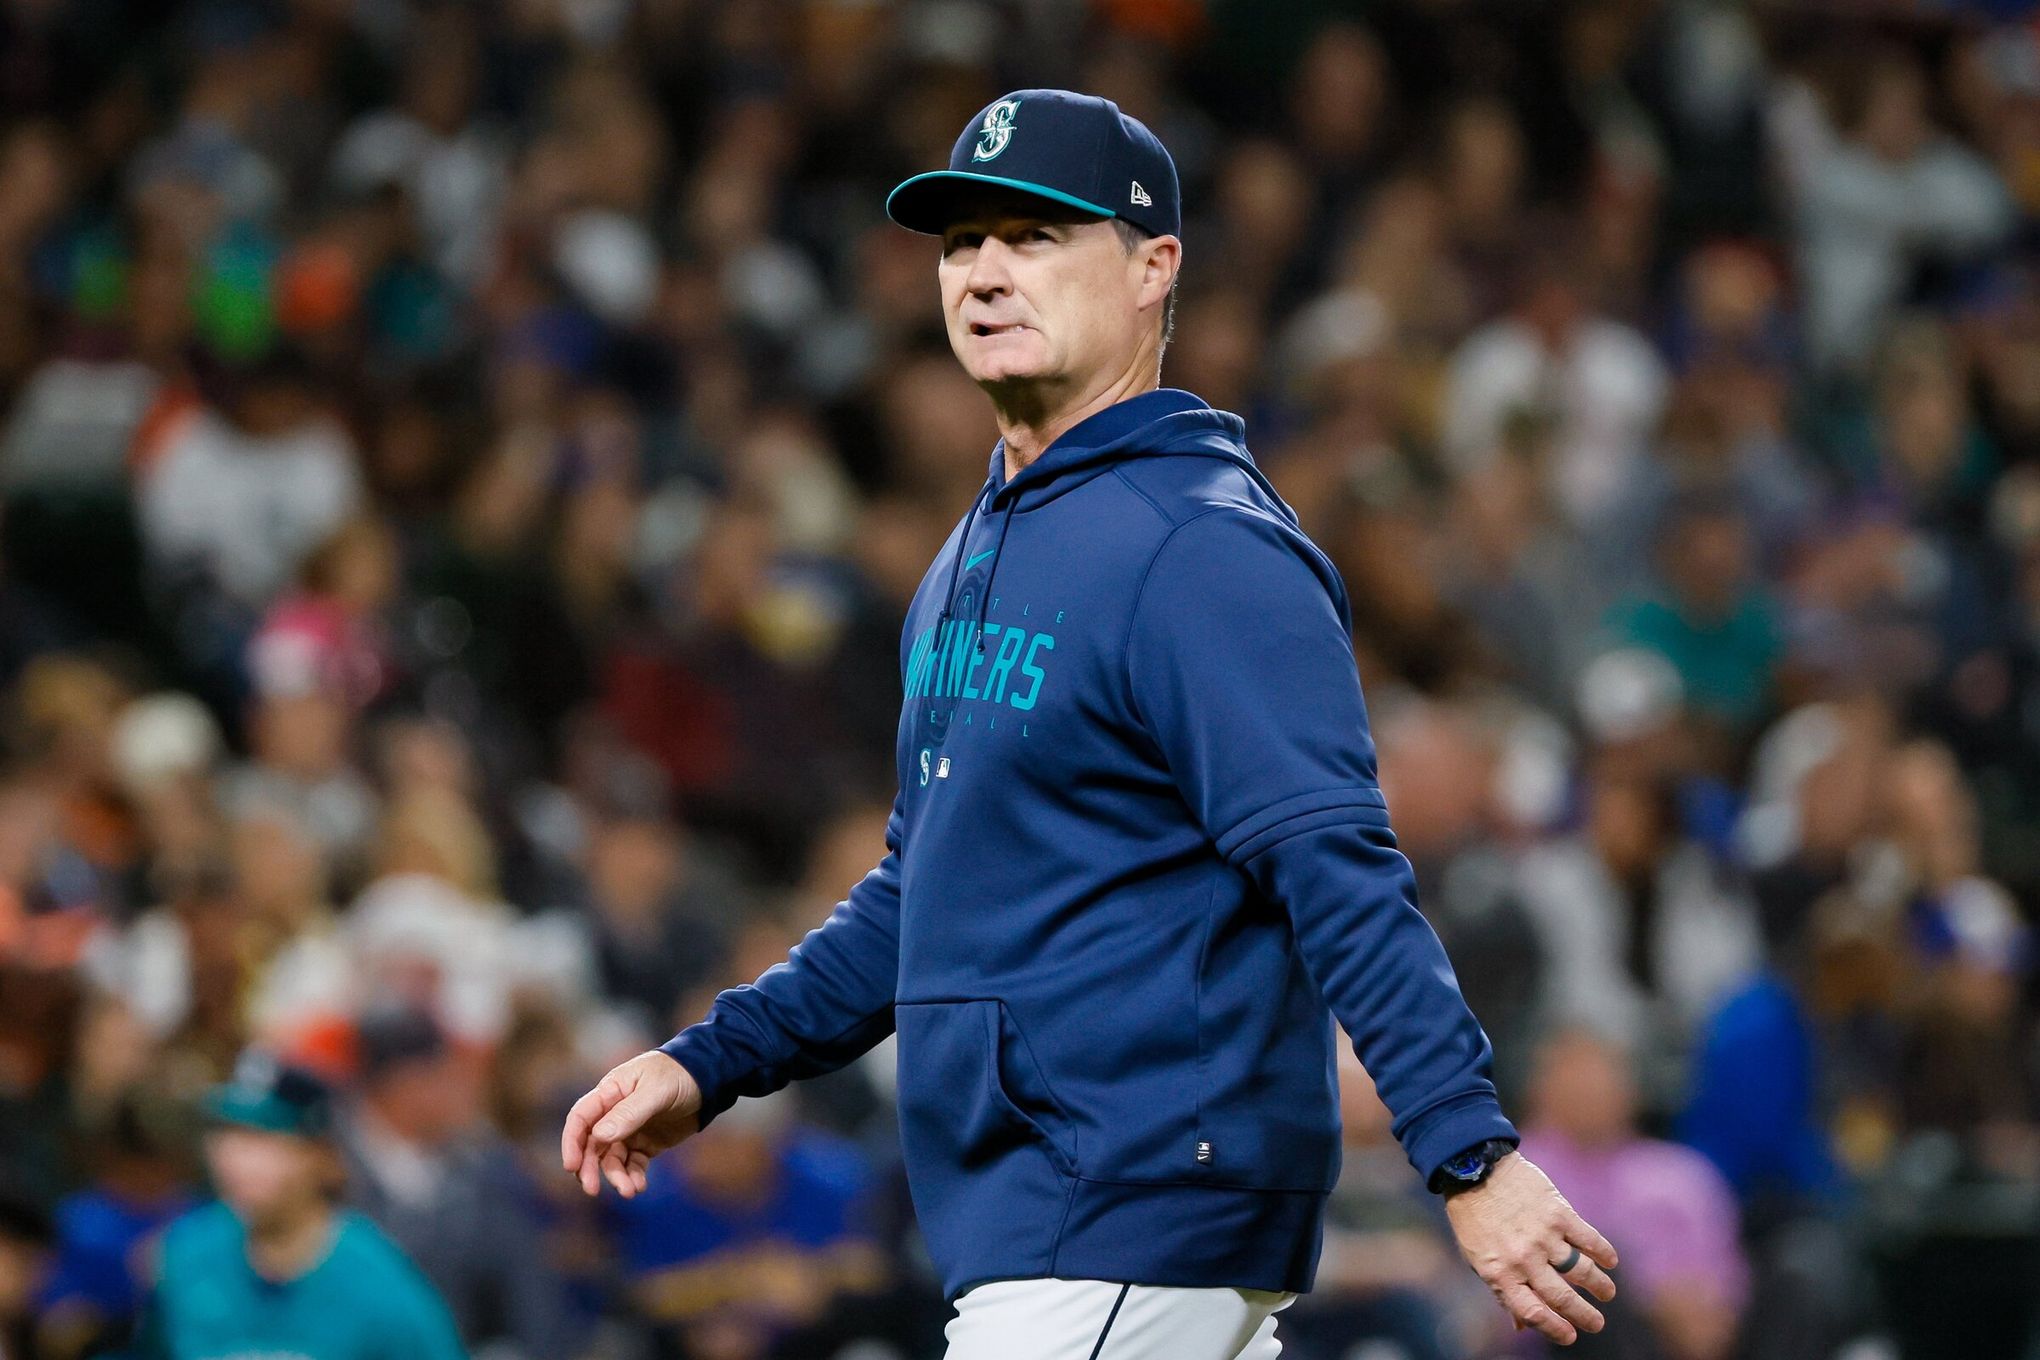 Don't let Mariners' end goal overshadow history some players are